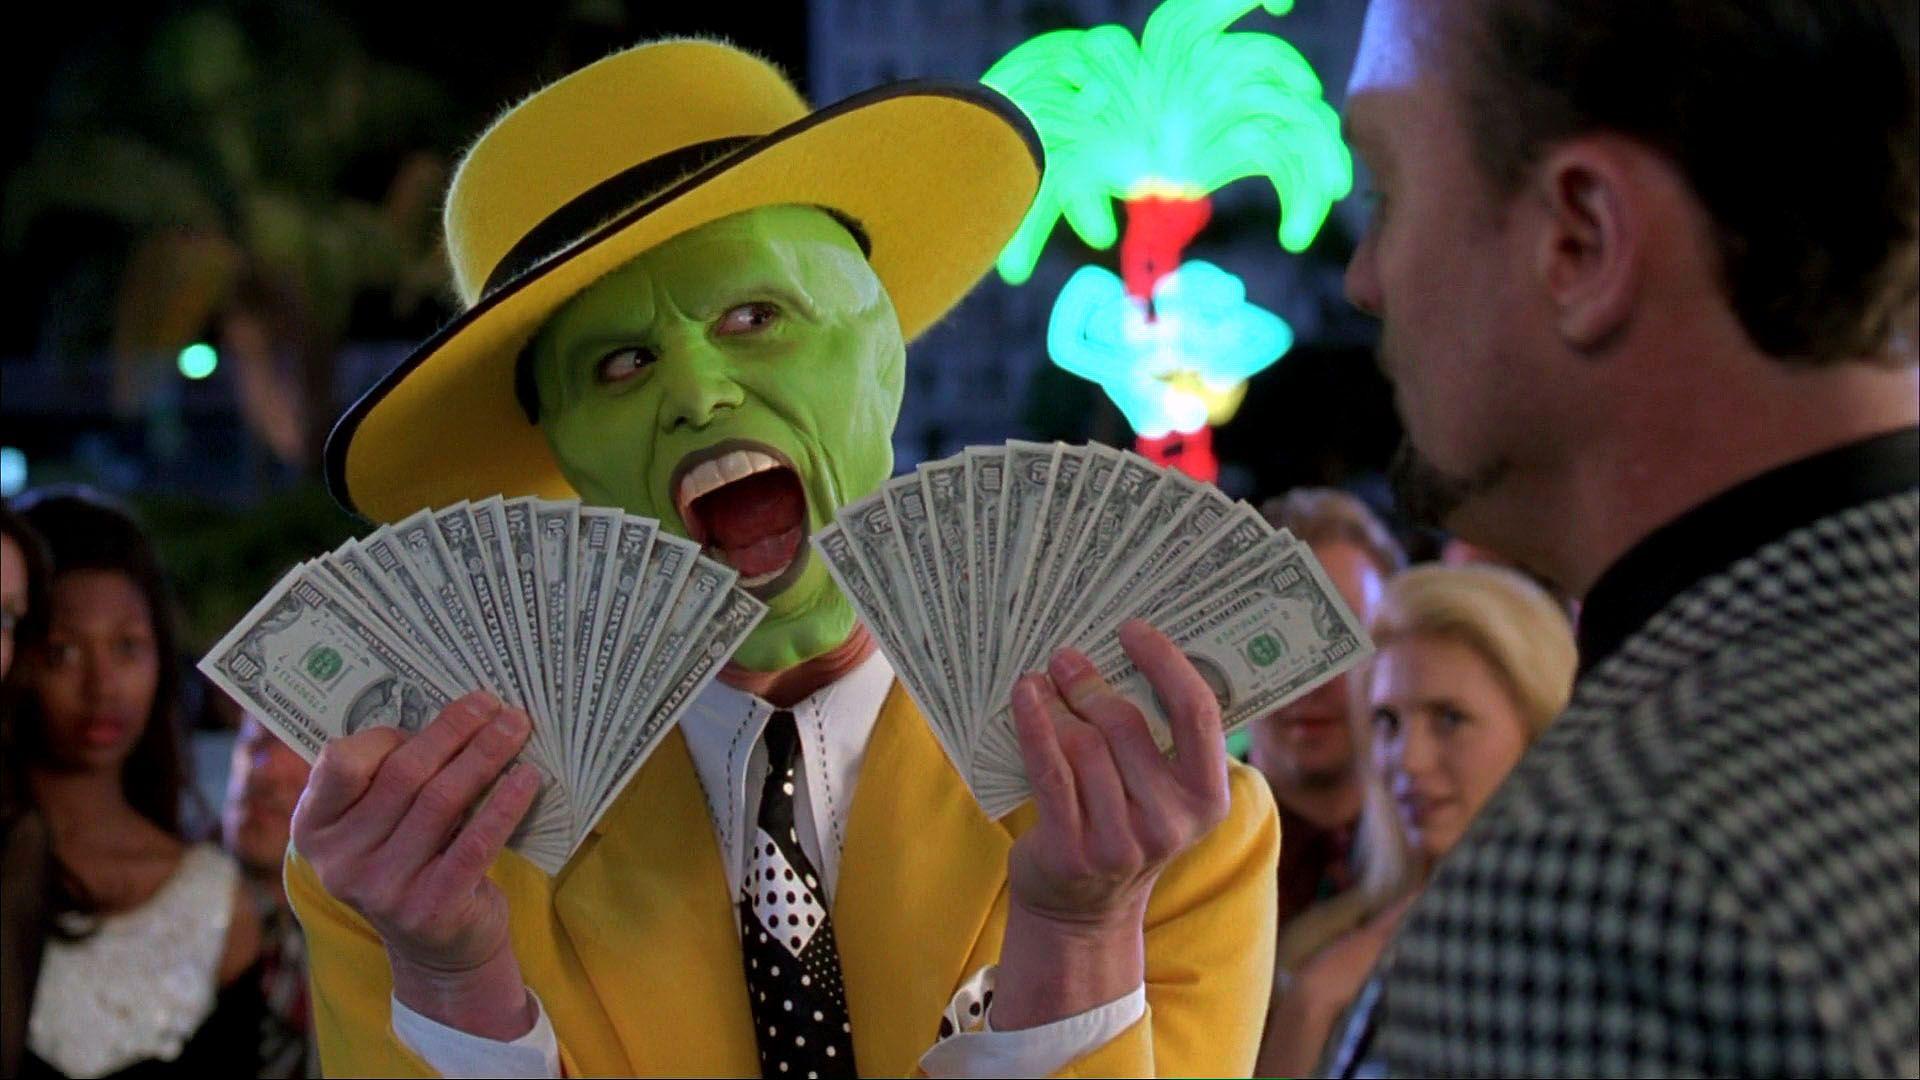 This is a really funny scene from The Mask when Stanley Ipkiss Jim